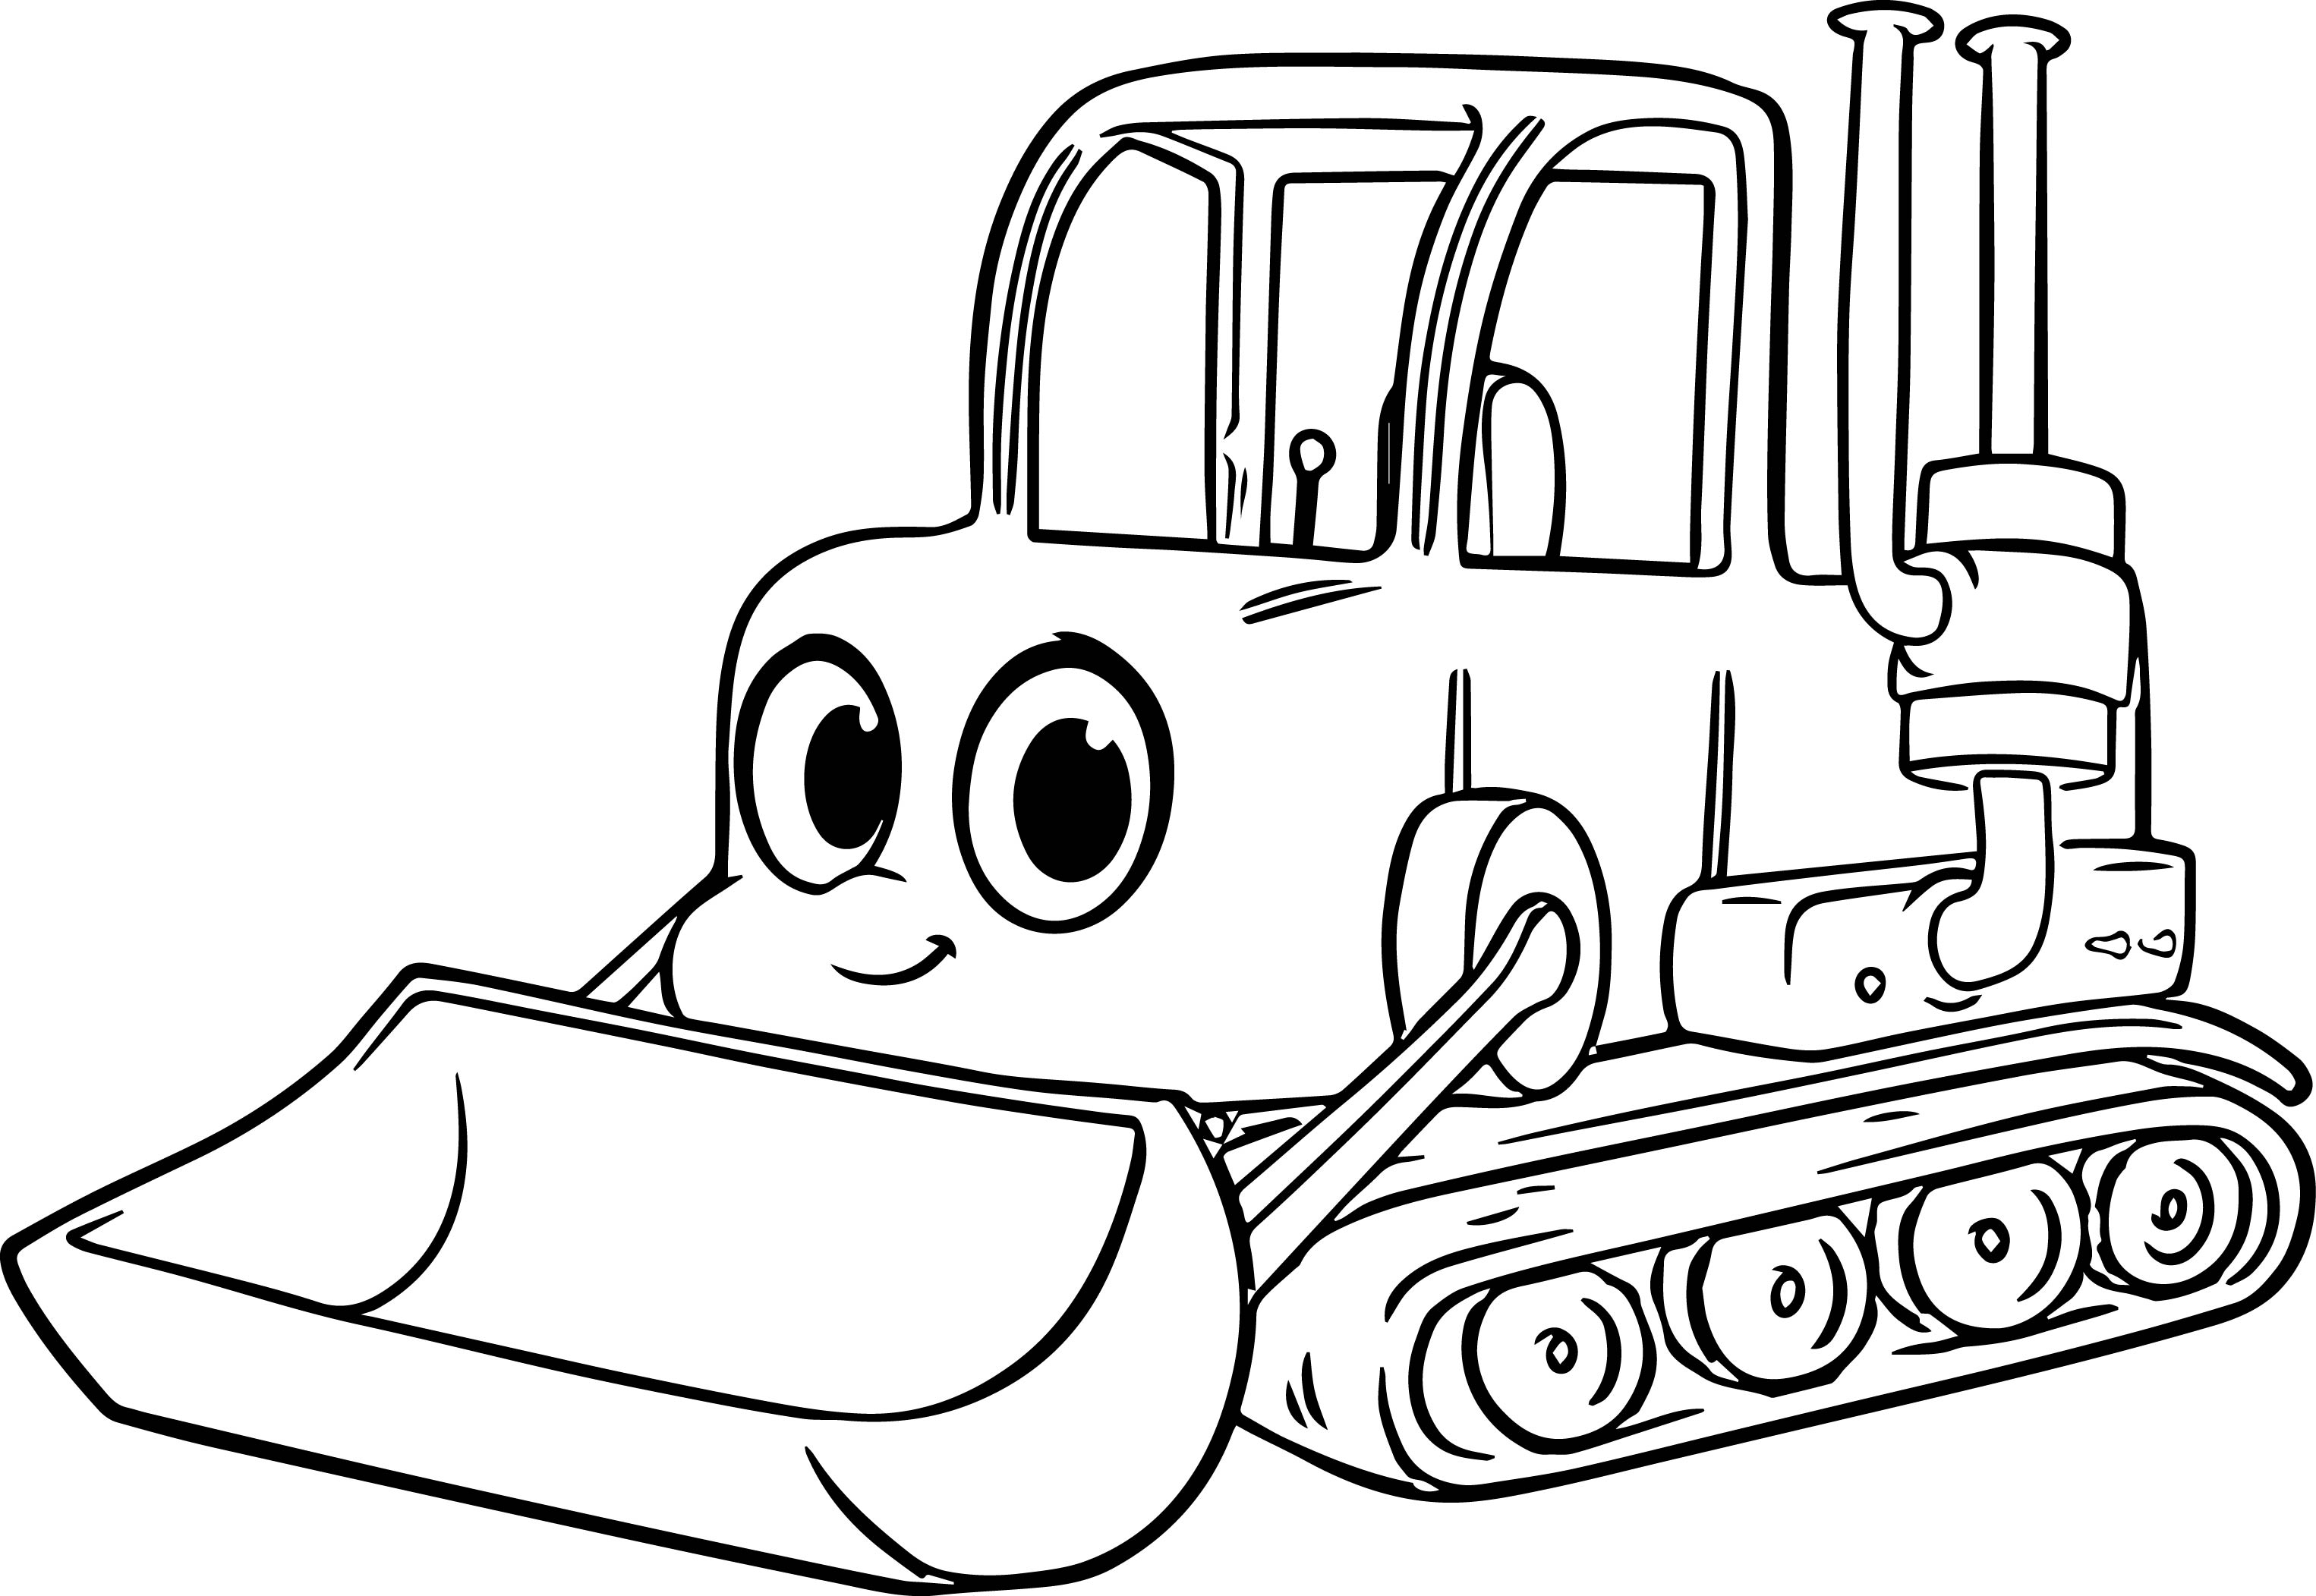 Hard Hat Coloring Page Coloring Coloring Outstanding Construction Pages Site Bing Images